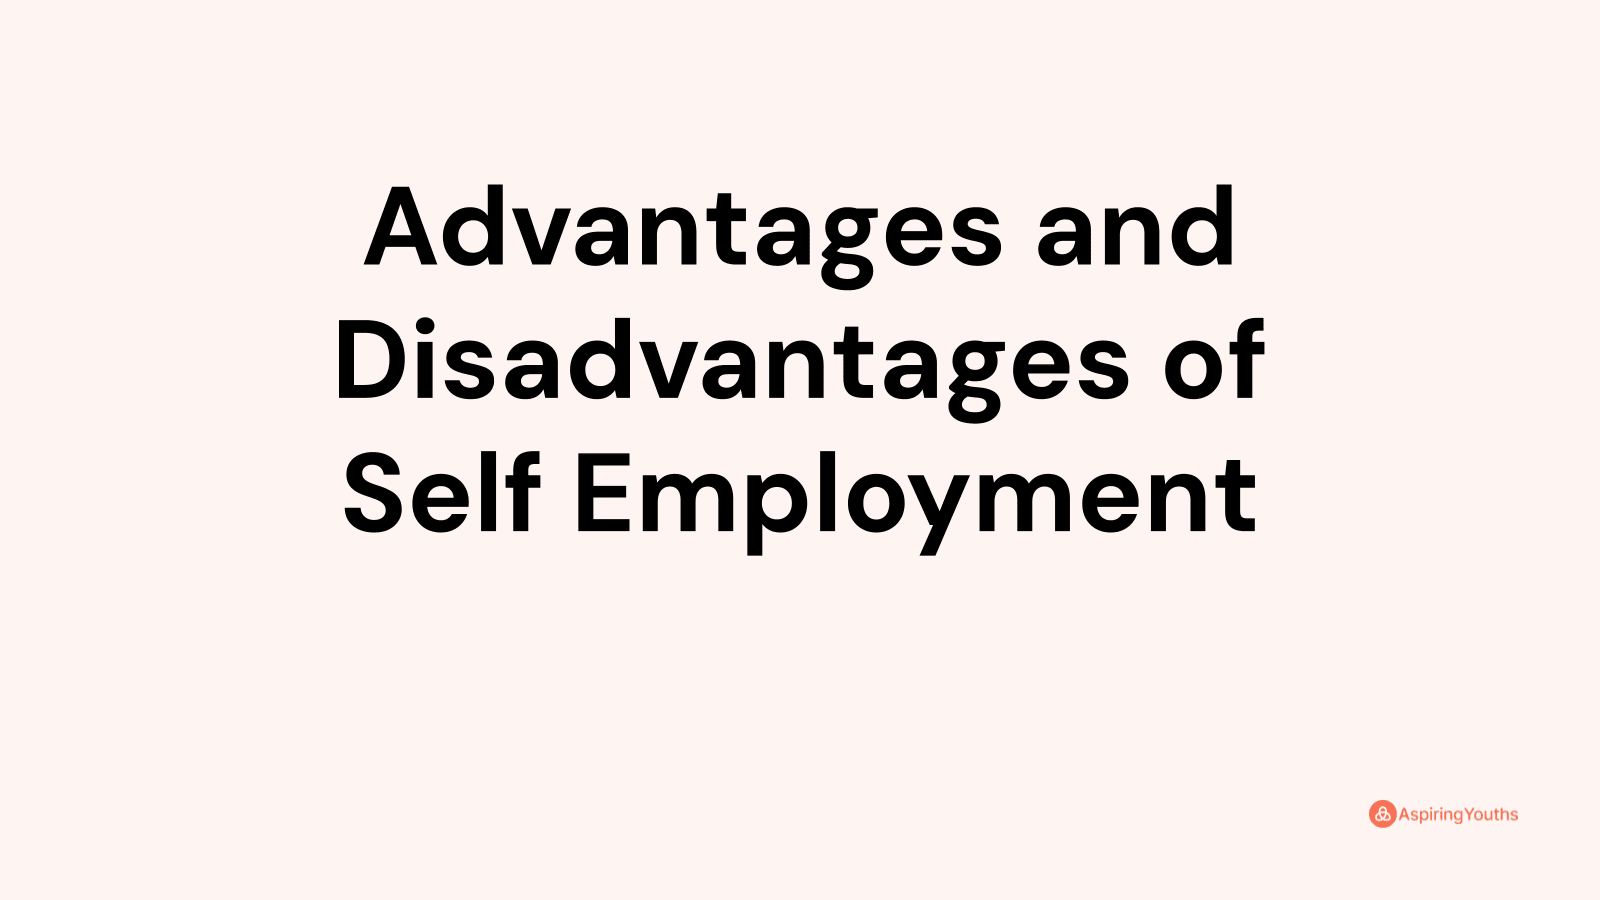 Advantages and disadvantages of Self Employment